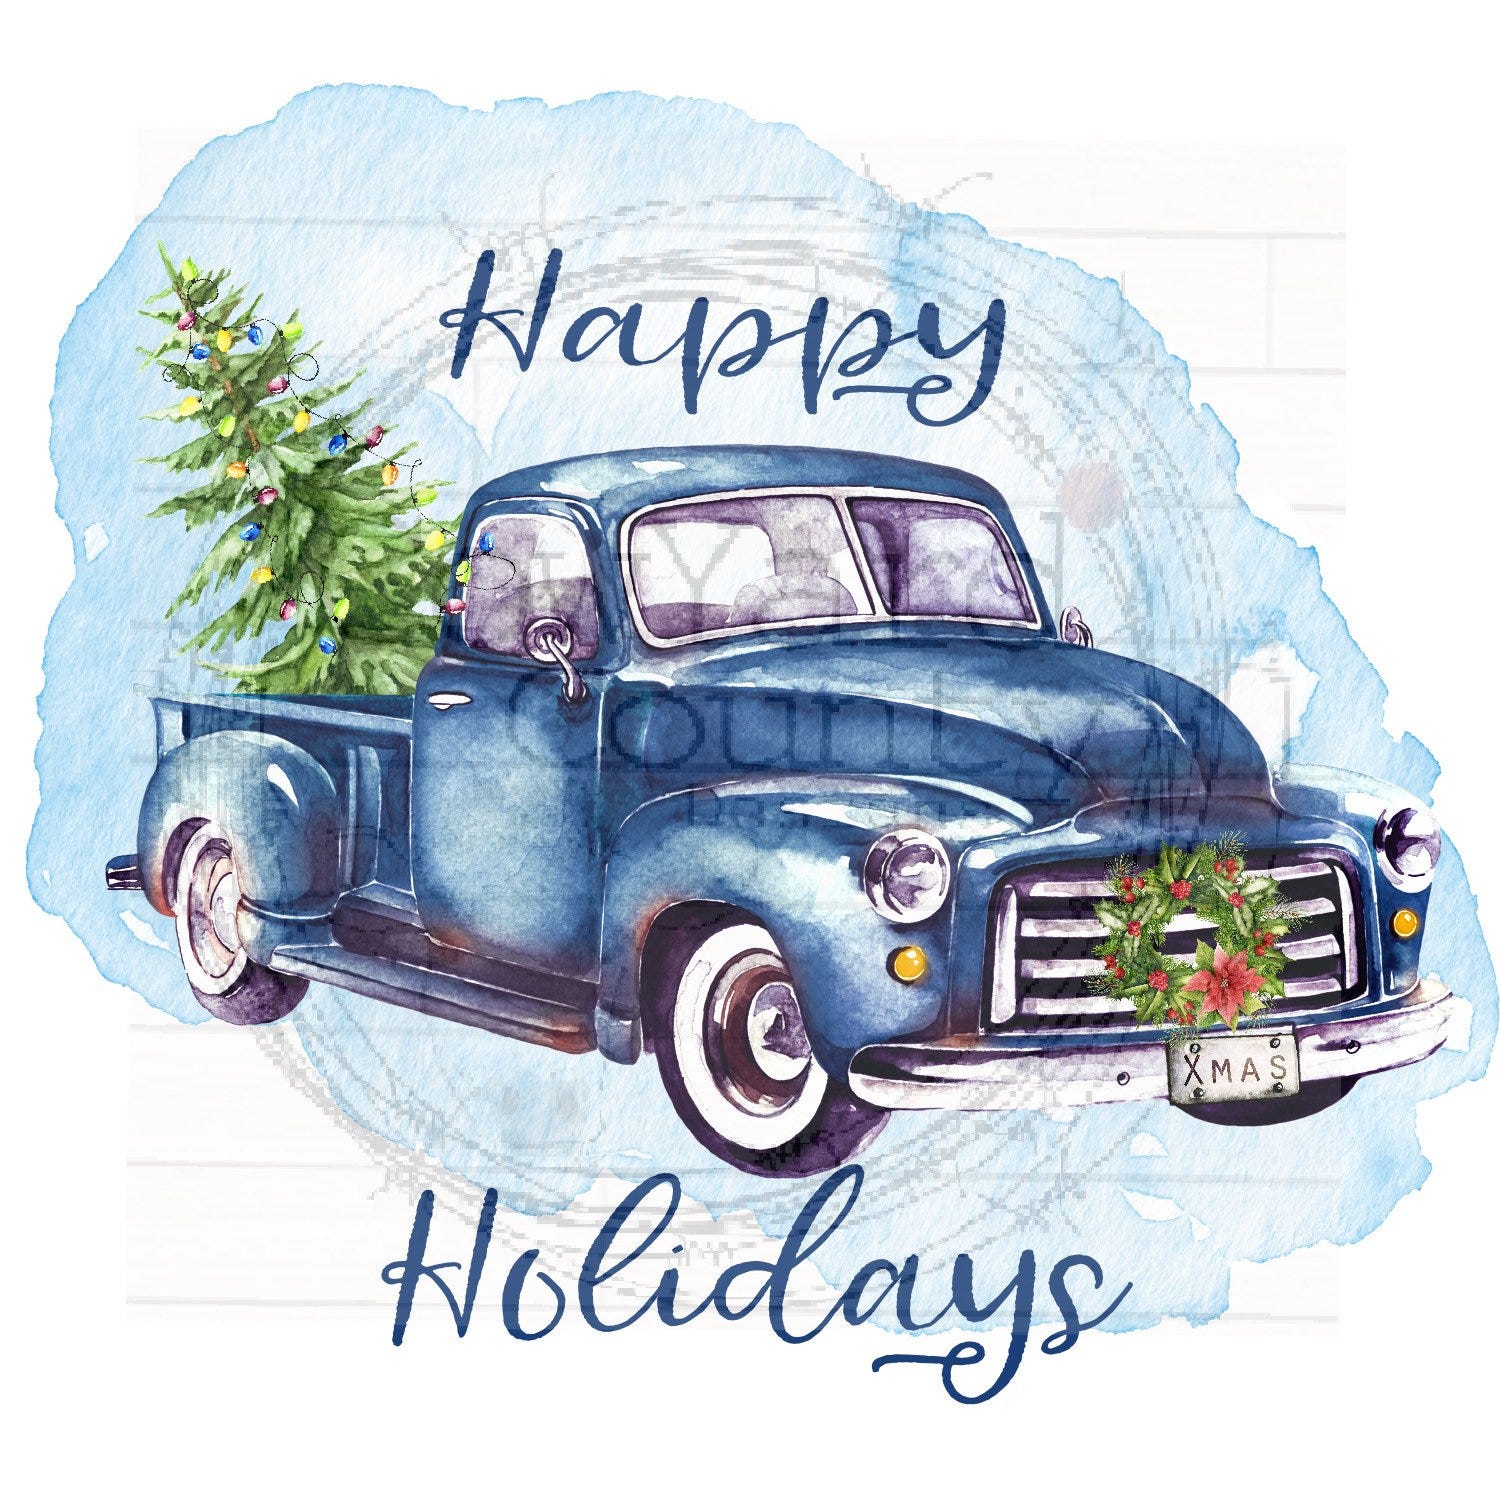 Blue Truck Design, Happy Holidays Sublimation Images, Christmas Designs, Old Truck Sublimation, Christmas Images, Christmas Downloads